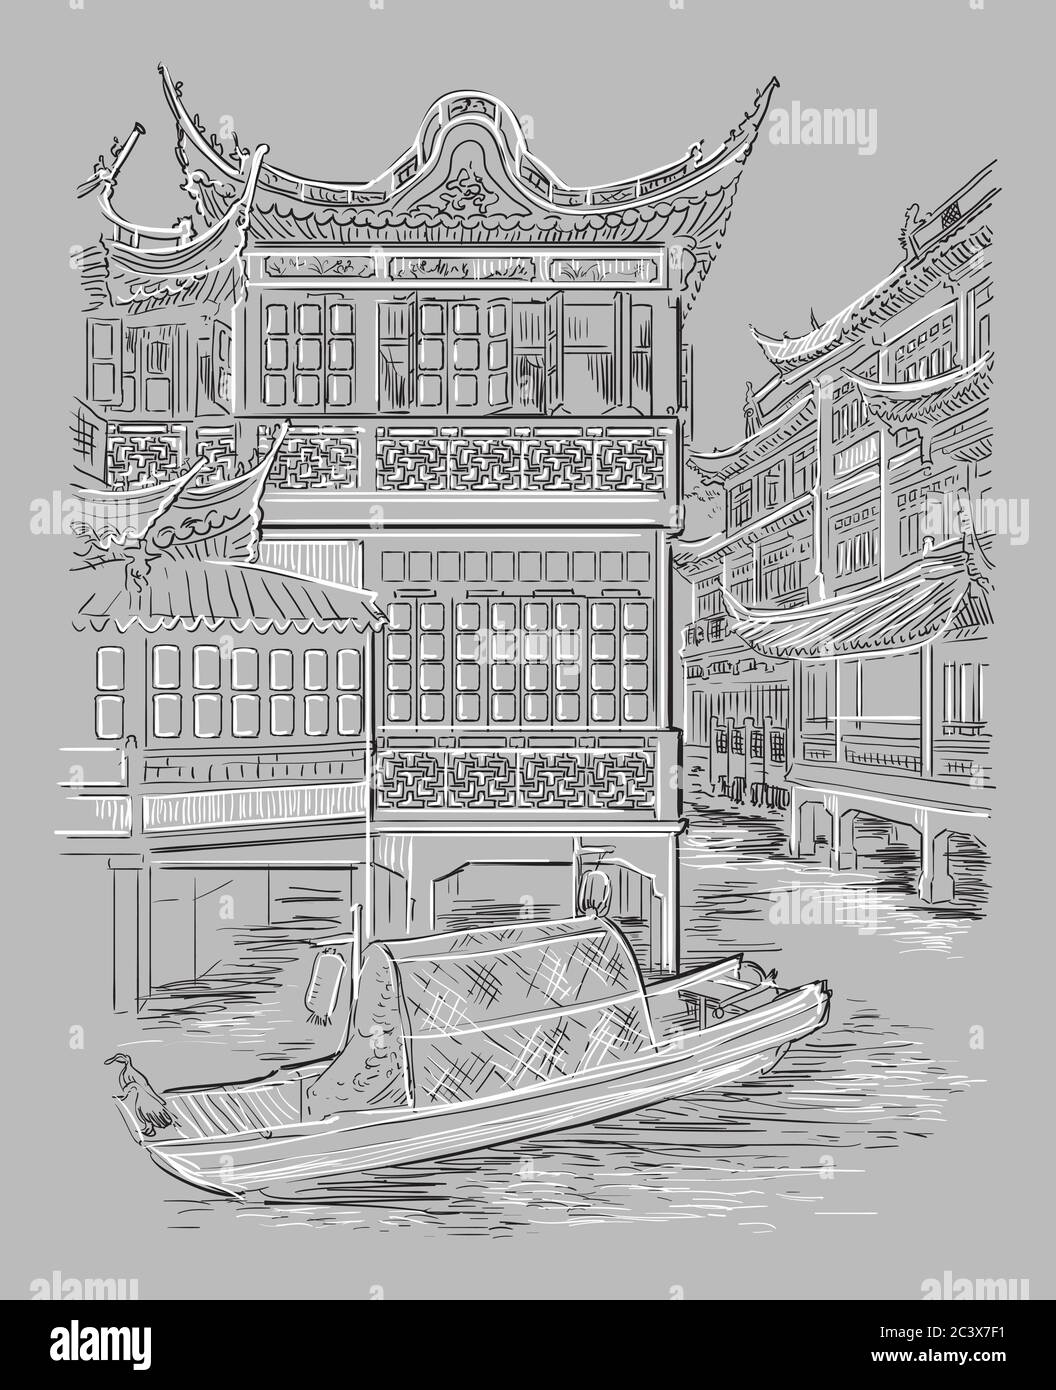 Yuyuan Garden (Garden of Happiness), Old City of Shanghai, landmark of China. Hand drawn vector sketch illustration isolated on gray background. China Stock Vector